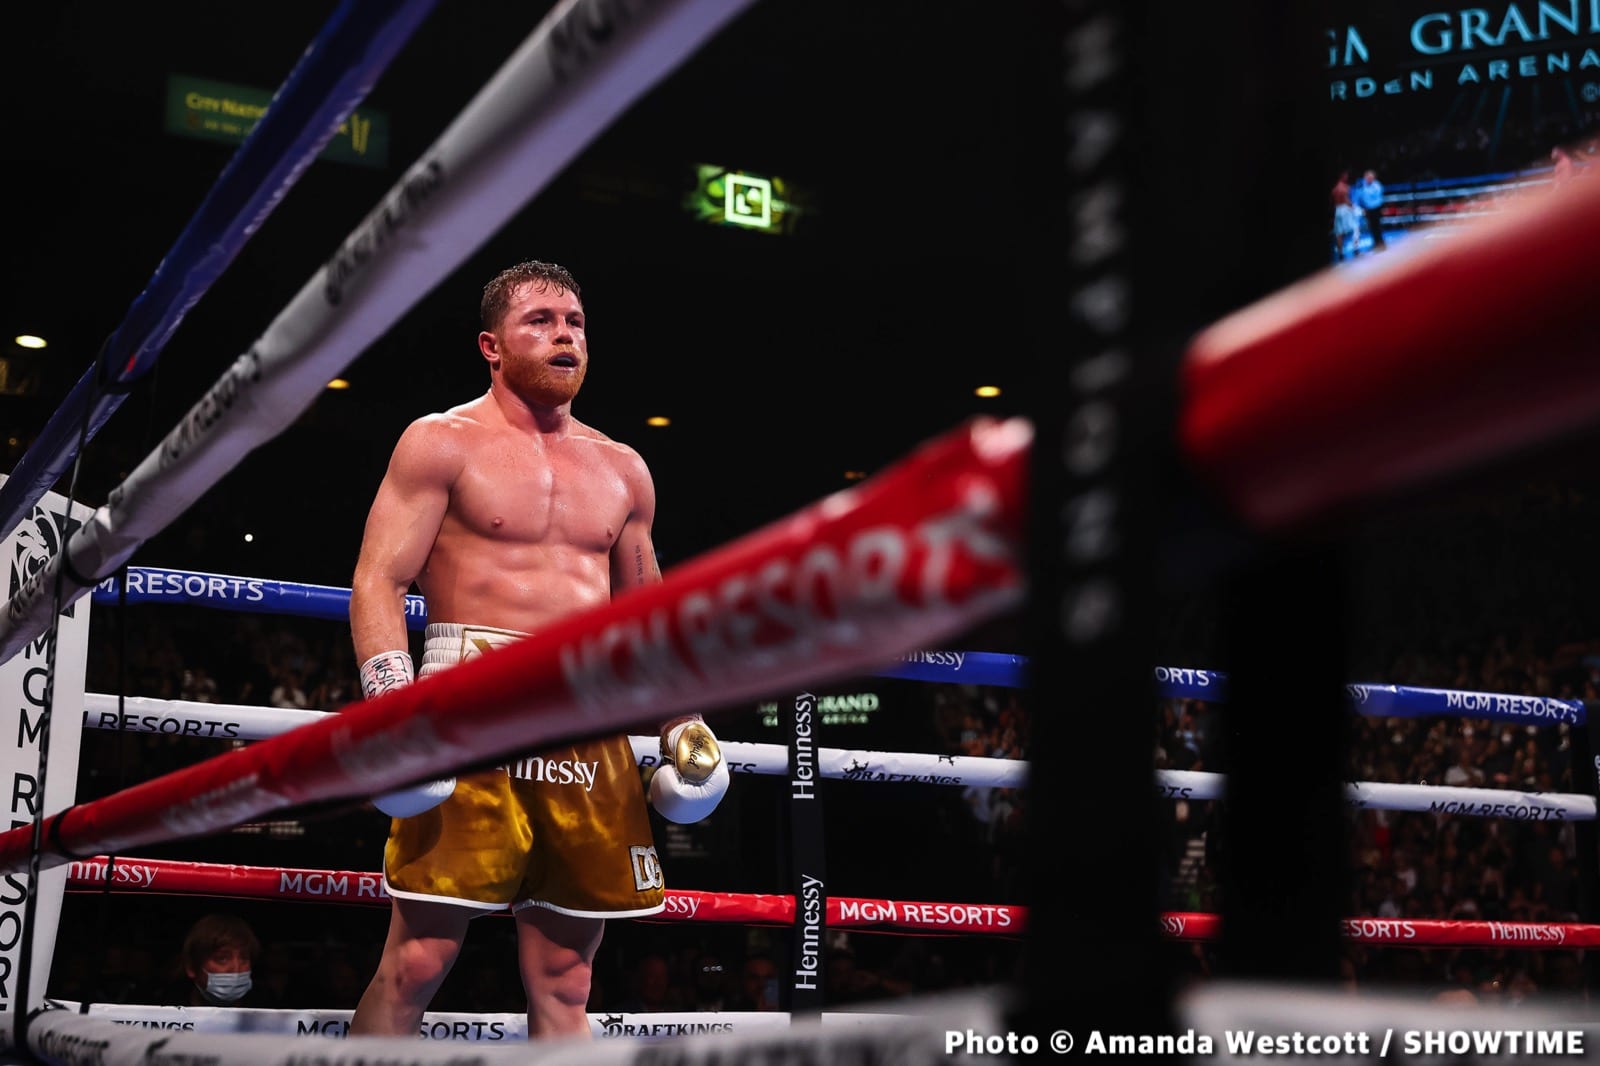 History-Making Canelo Says He Will be Back In May; But Who Will His Opponent Be?